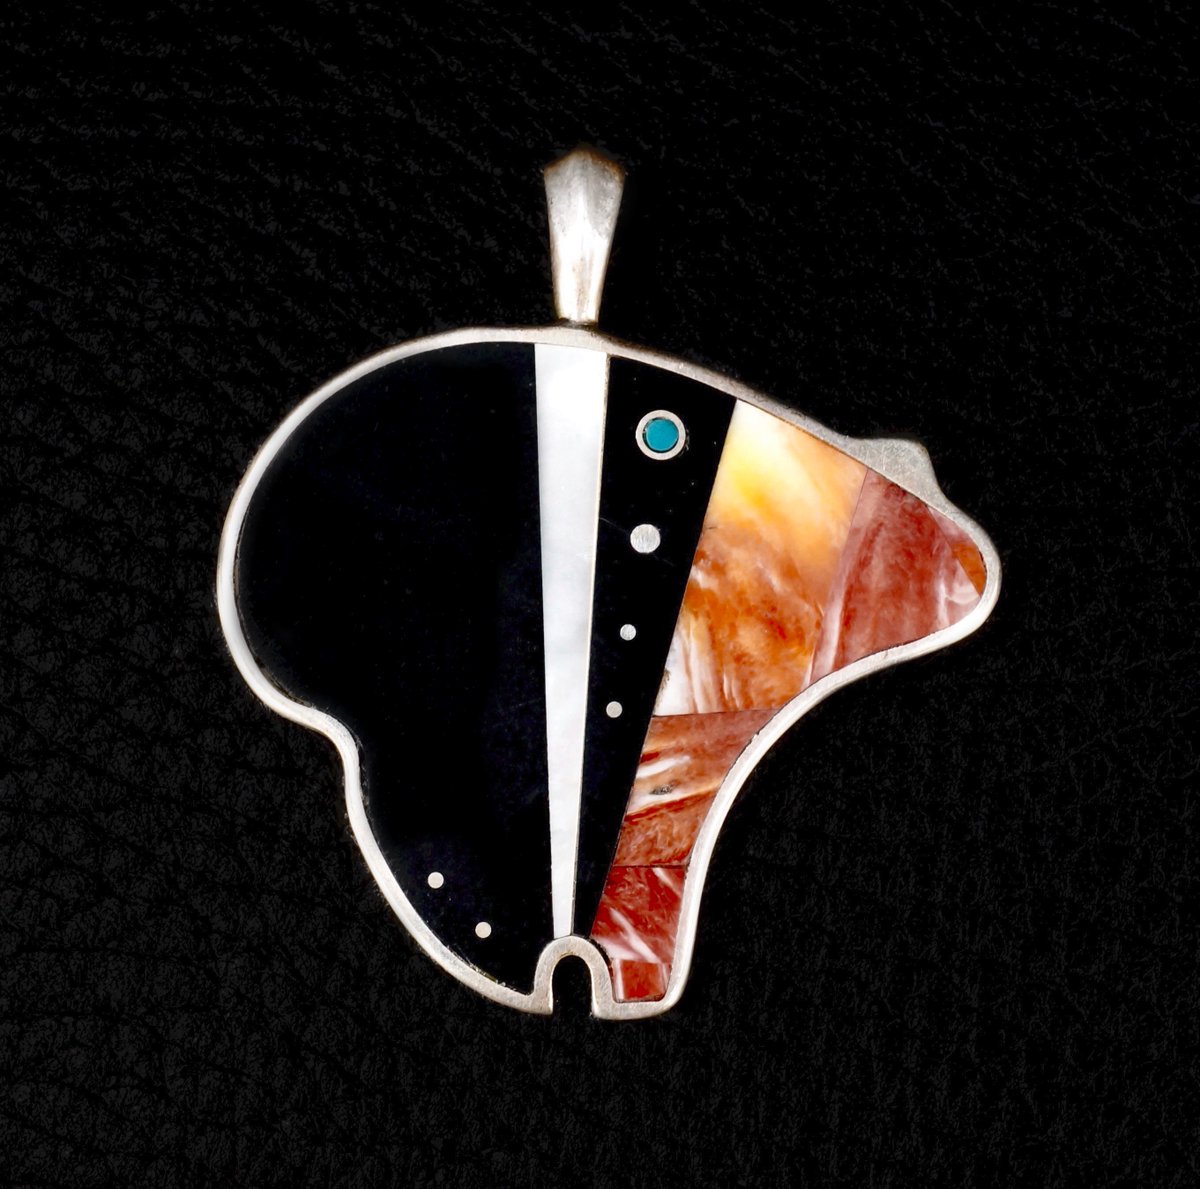 Vintage Bear Native American Zuni Multi Stone Inlay Silver Pendant by Alice Royer farriderwest.etsy.com/listing/163045… 
Available at Far-Rider-West.com 
#bear #turquoisejewelry #vintagejewelry #western #spiritualjewelry #nativeamerican #indianjewelry #totem #silverpendant